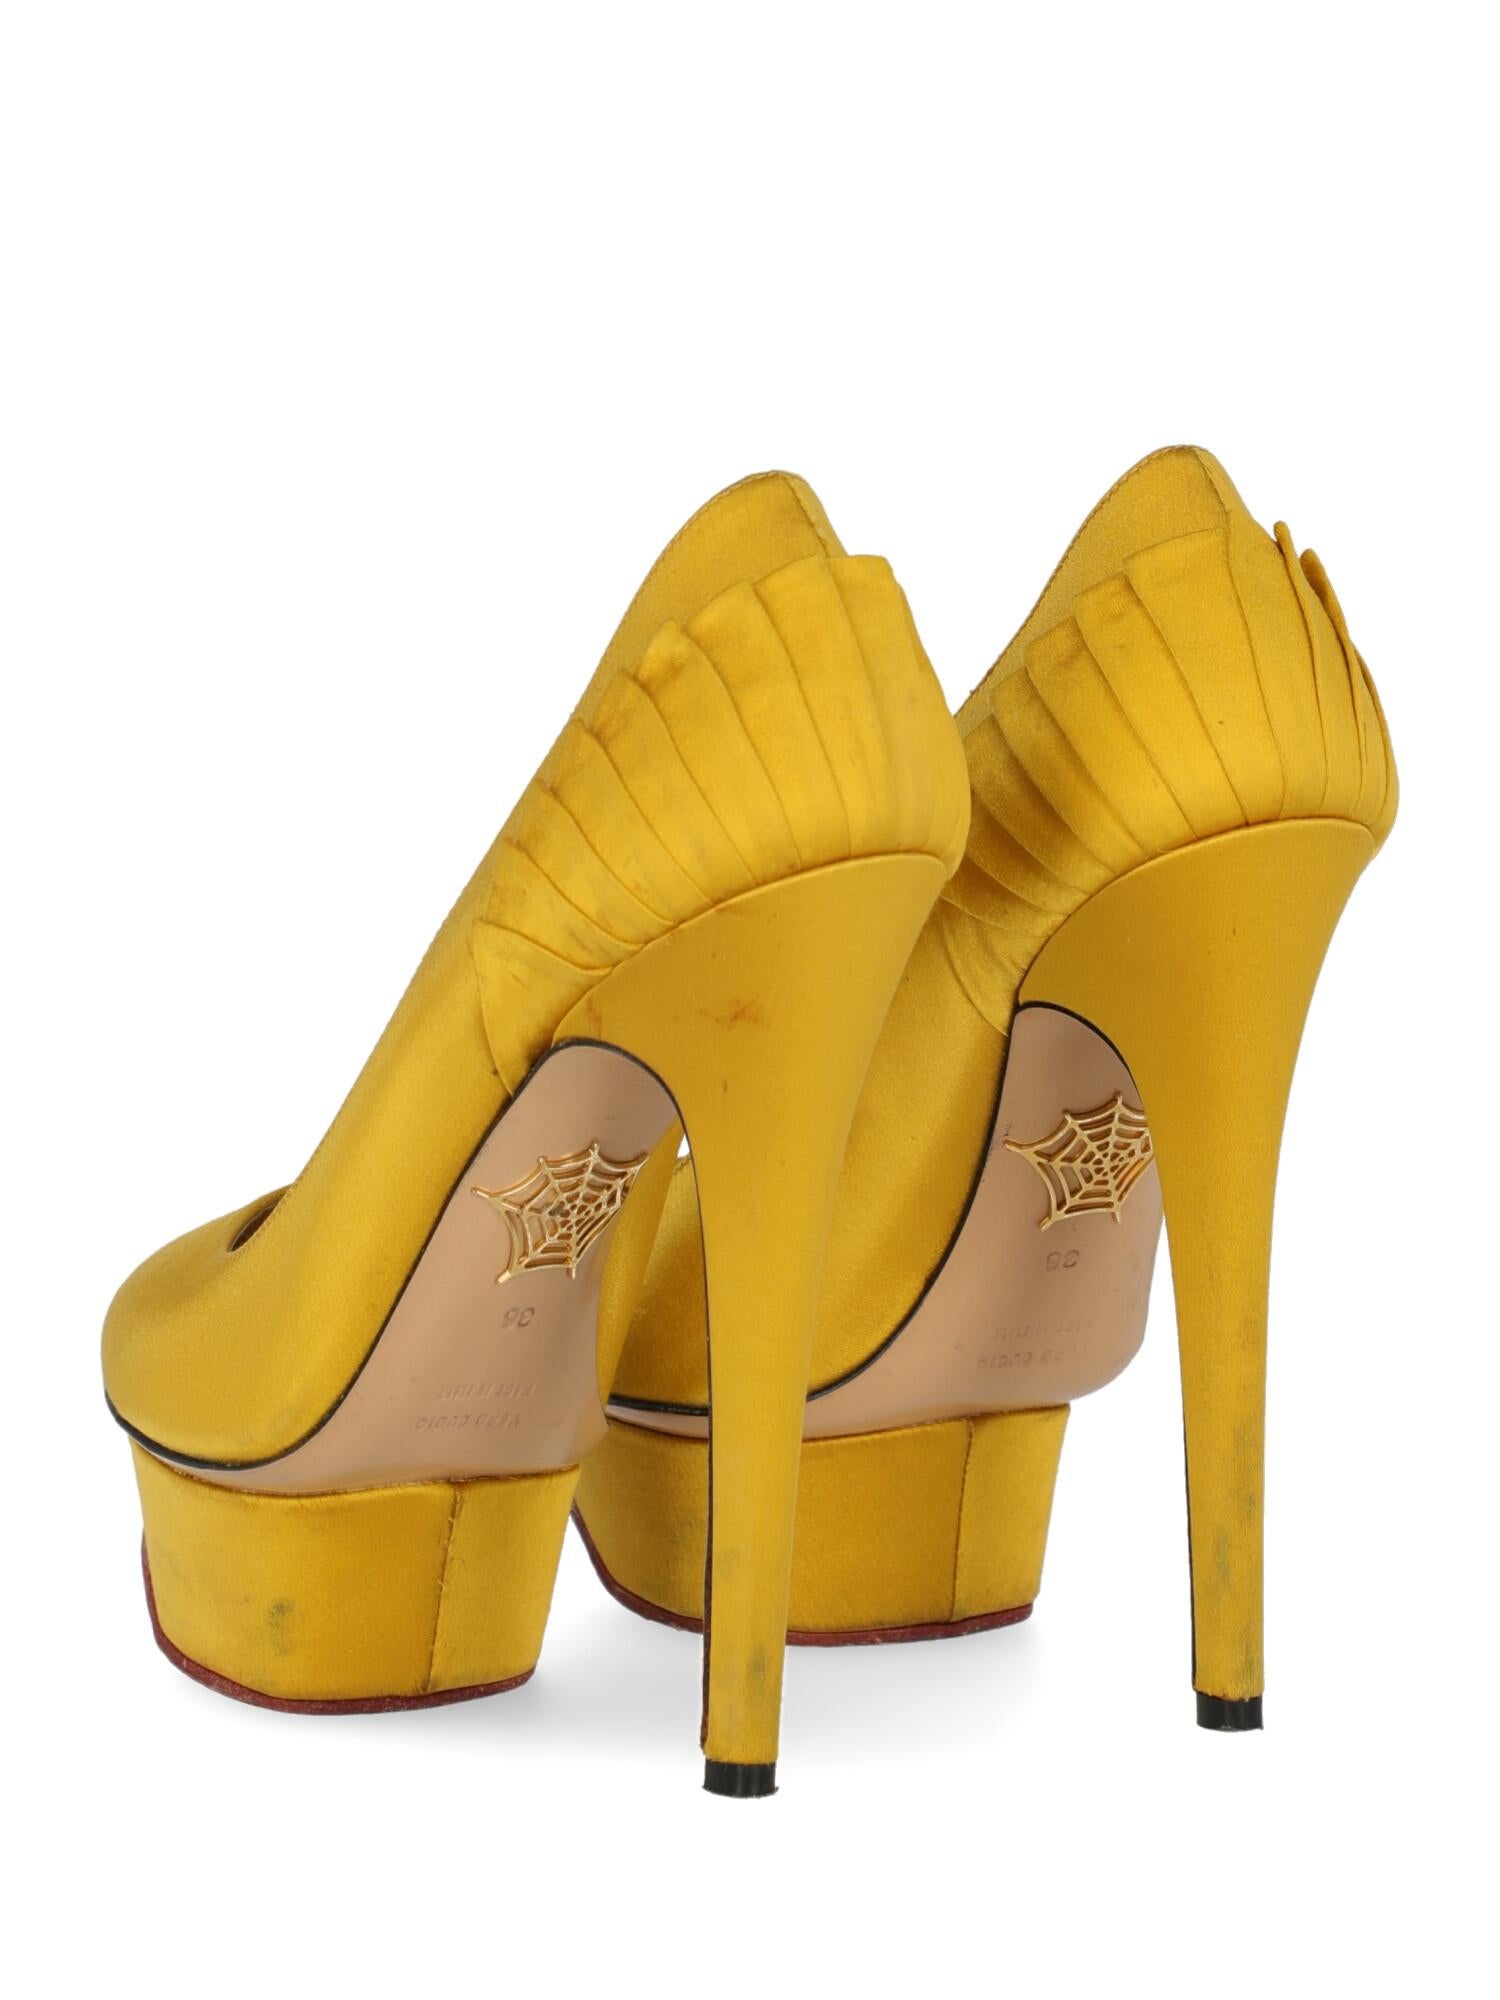 Women's Charlotte Olympia Woman Pumps Yellow Fabric IT 36 For Sale